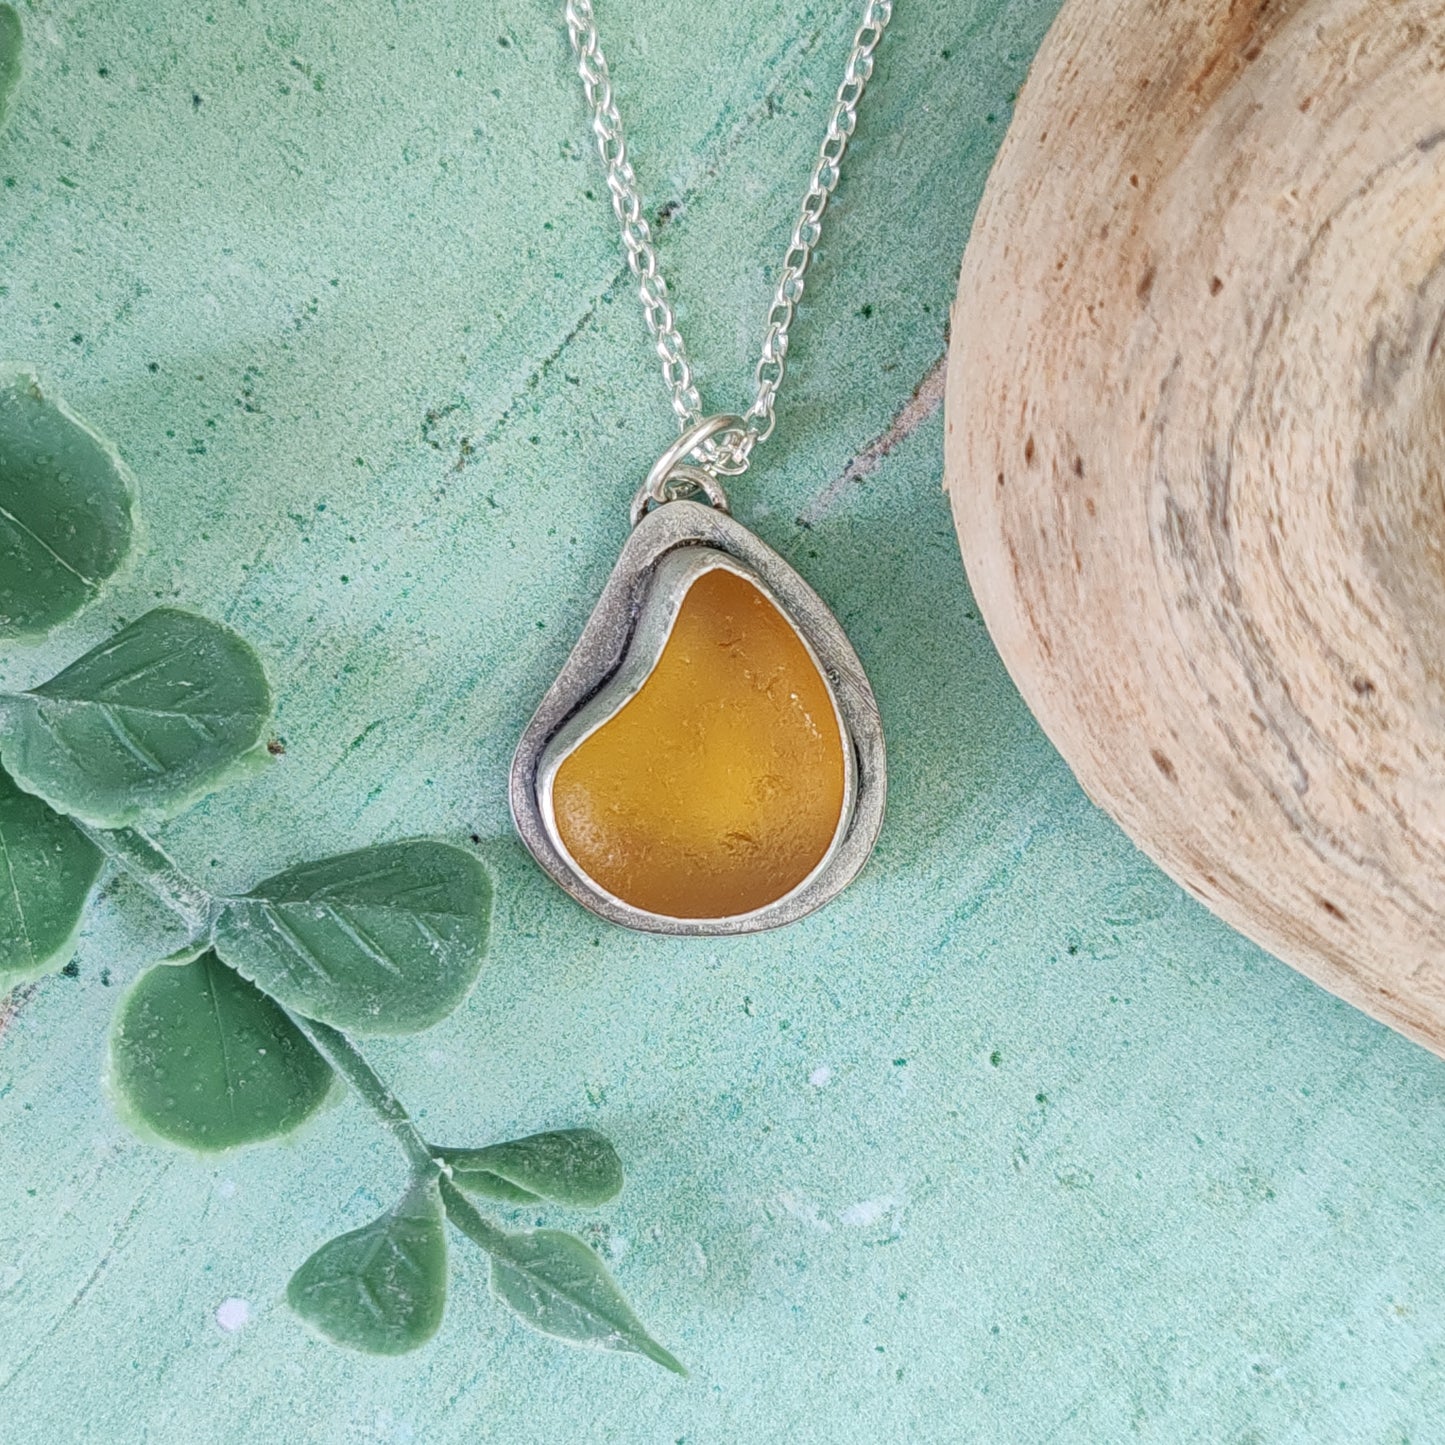 Yellow Sea Glass Necklace